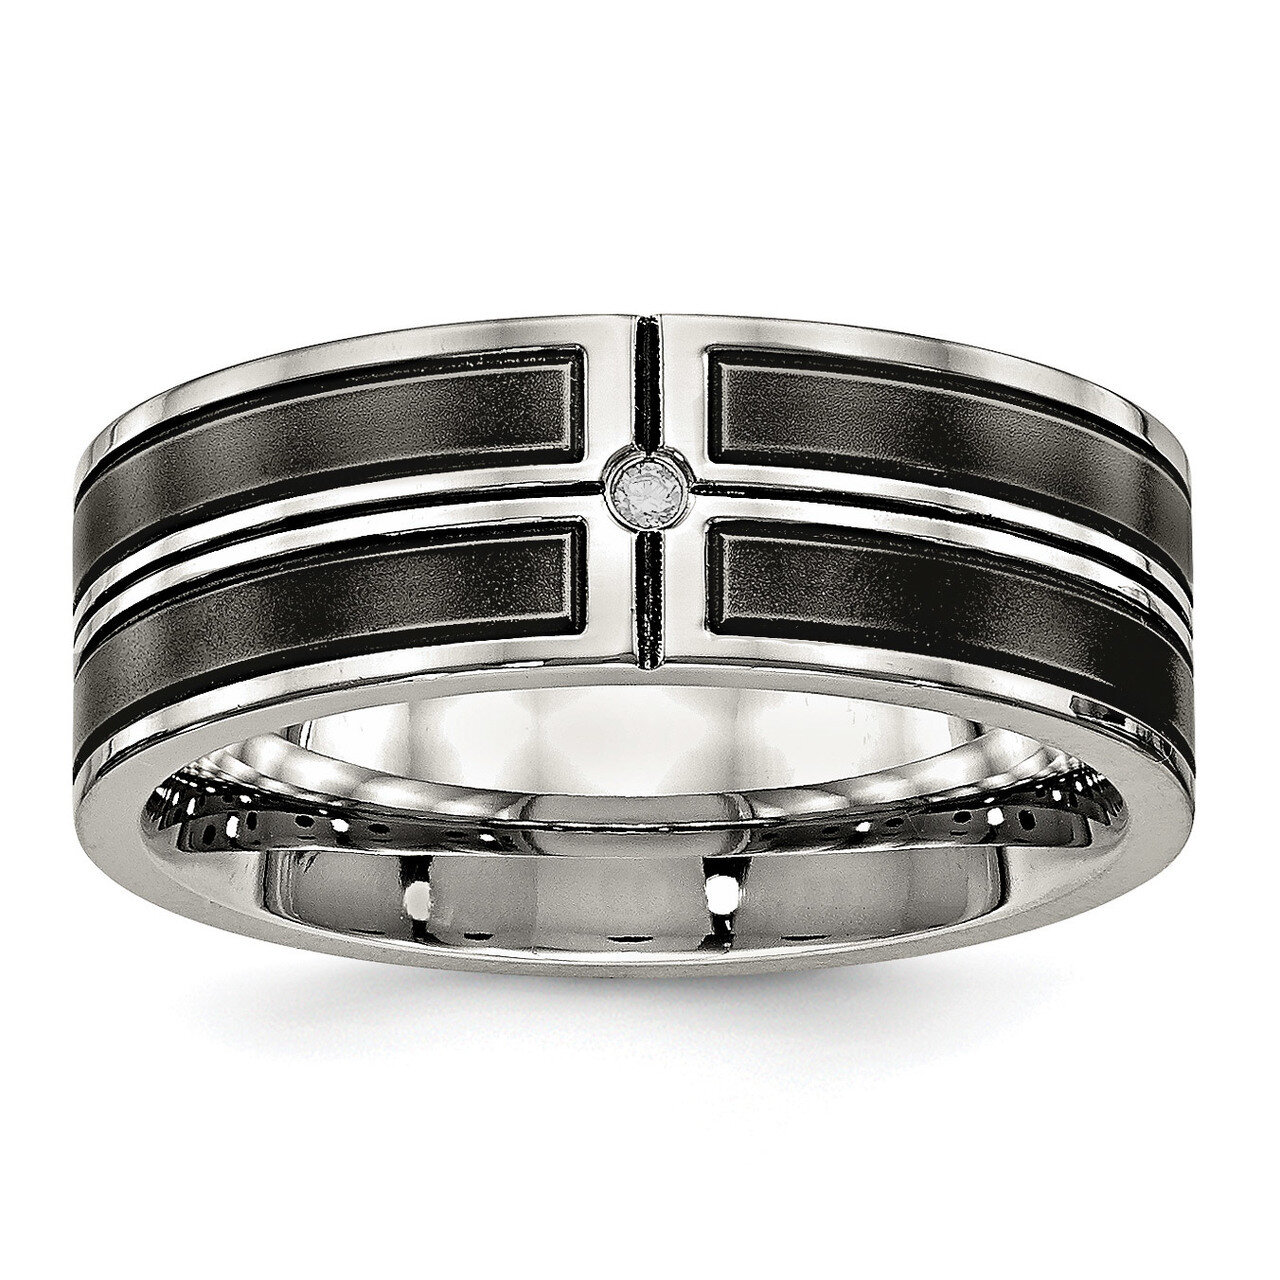 Black IP Plated CZ Diamond Band Stainless Steel Brushed and Polished SR549